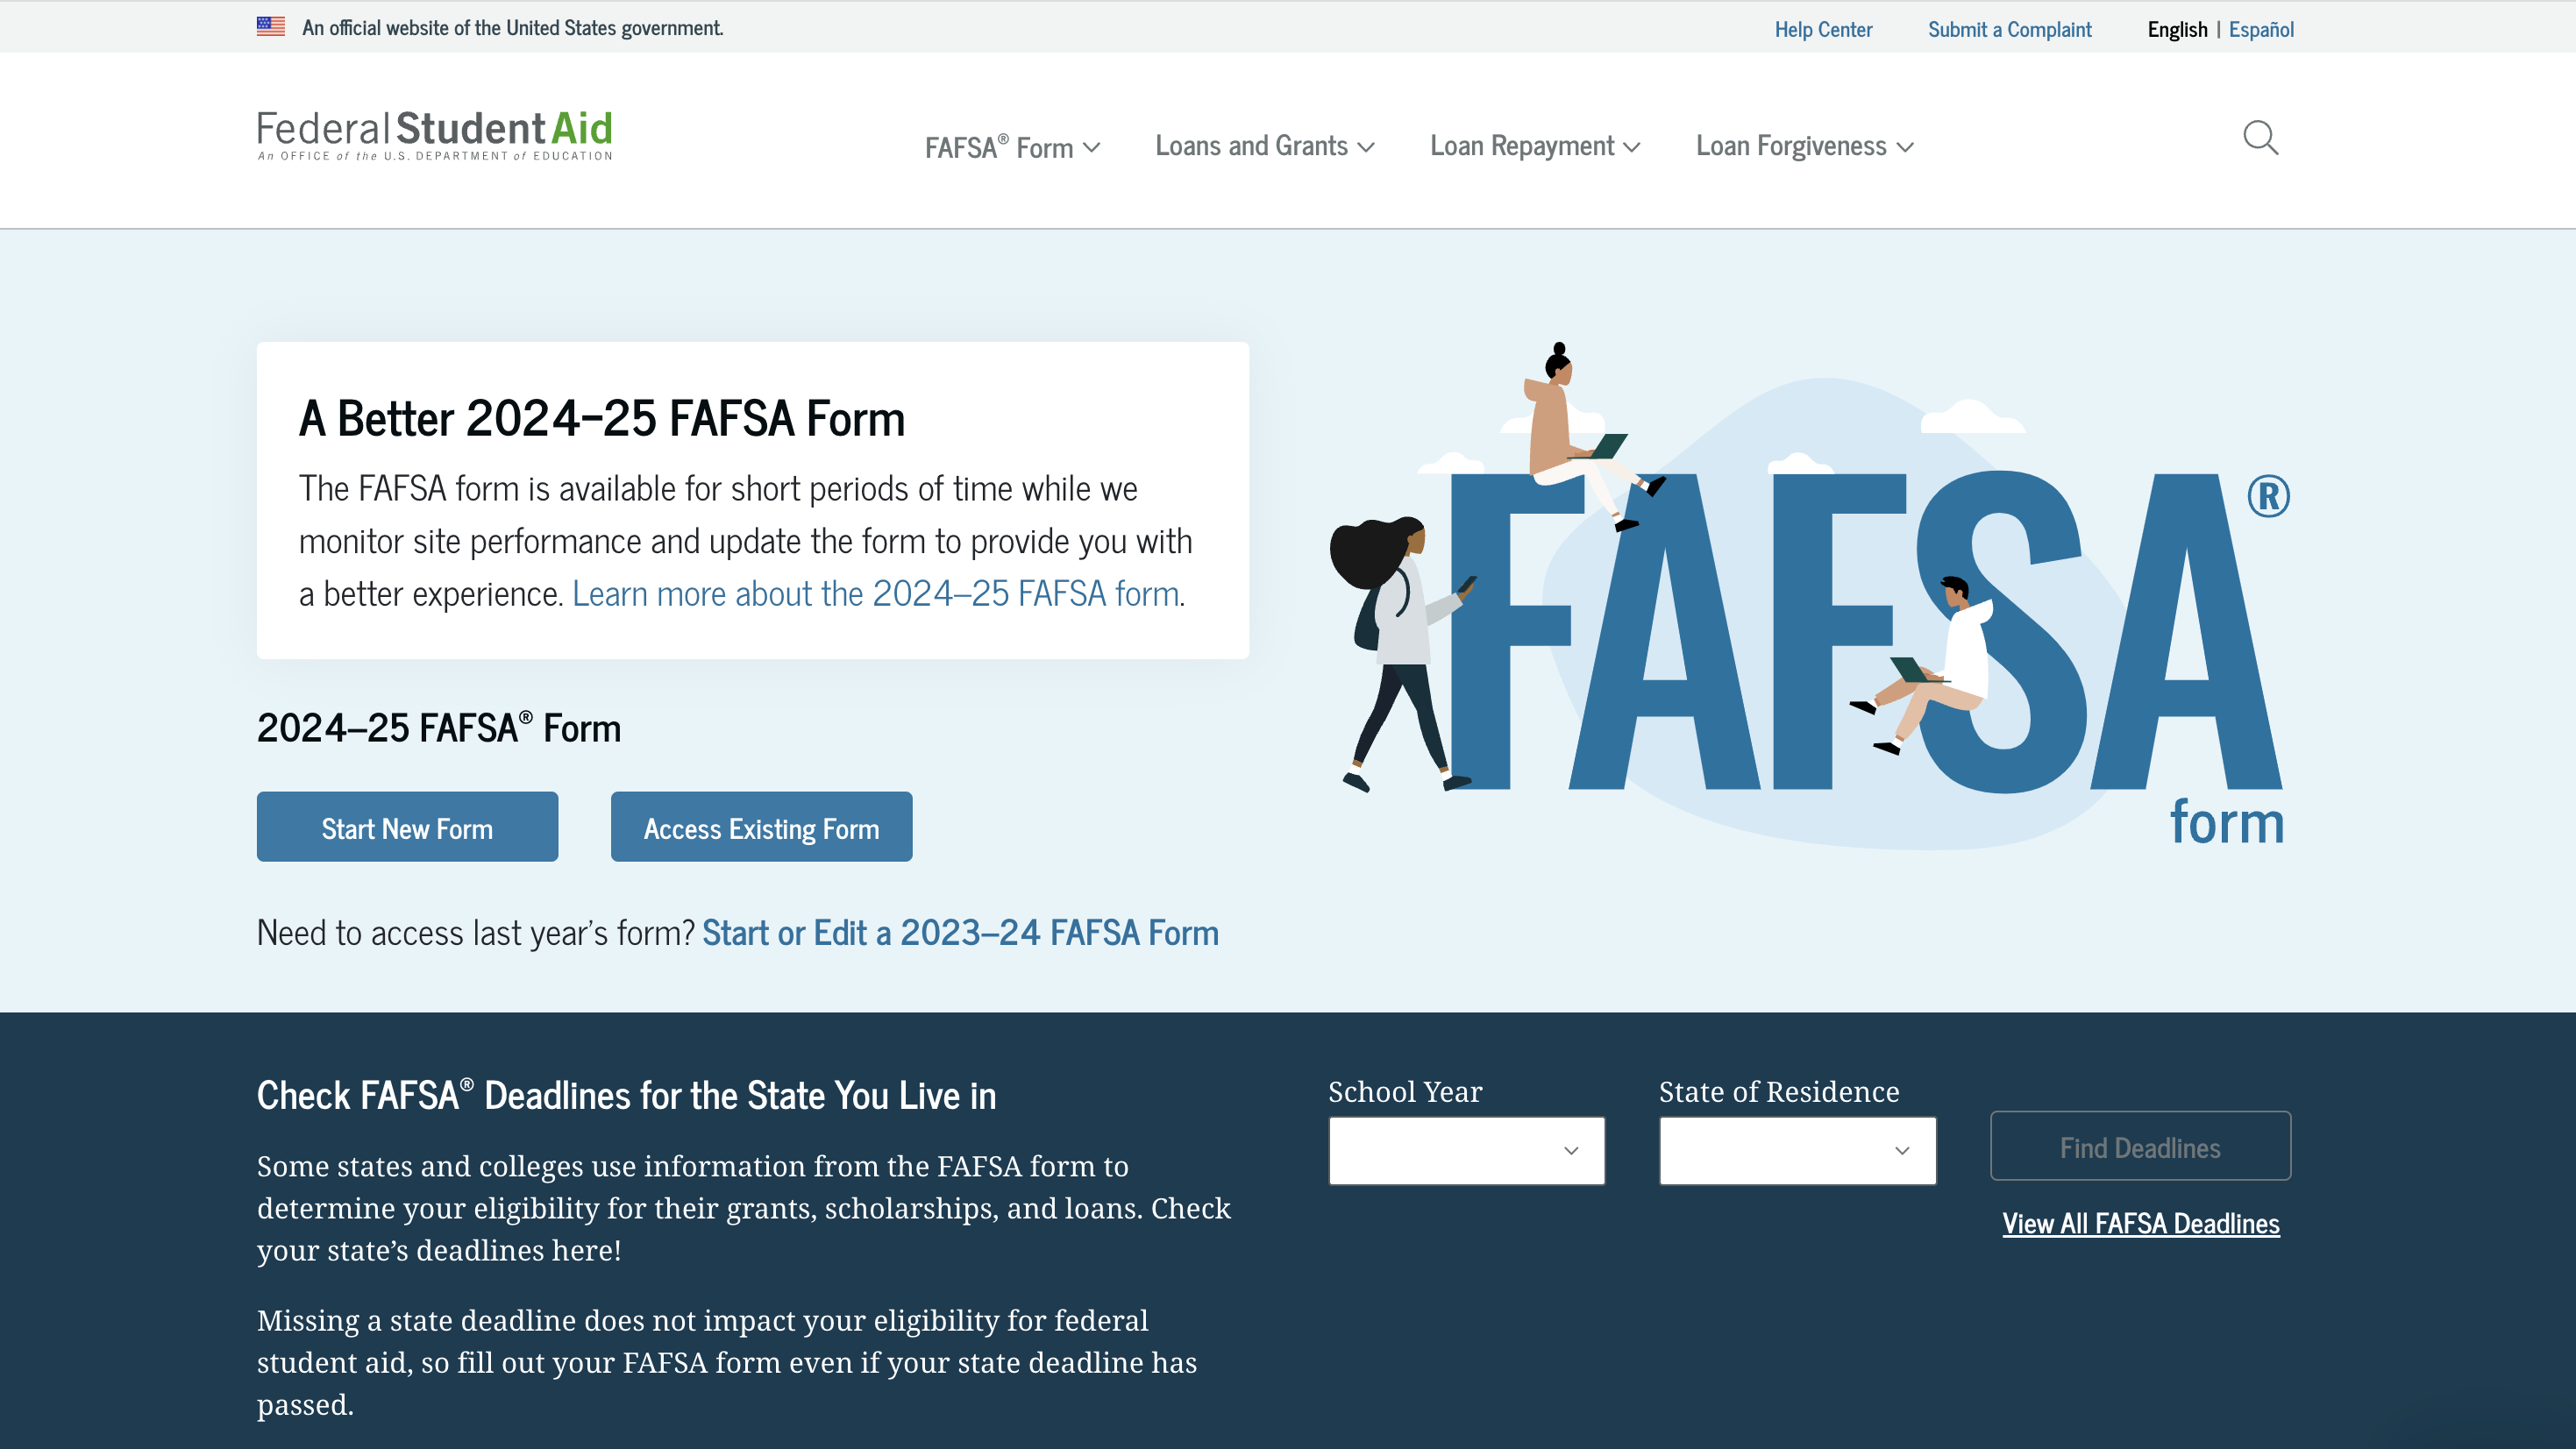 The FAFSA rollout has been rough on students. The biggest problem is yet to come